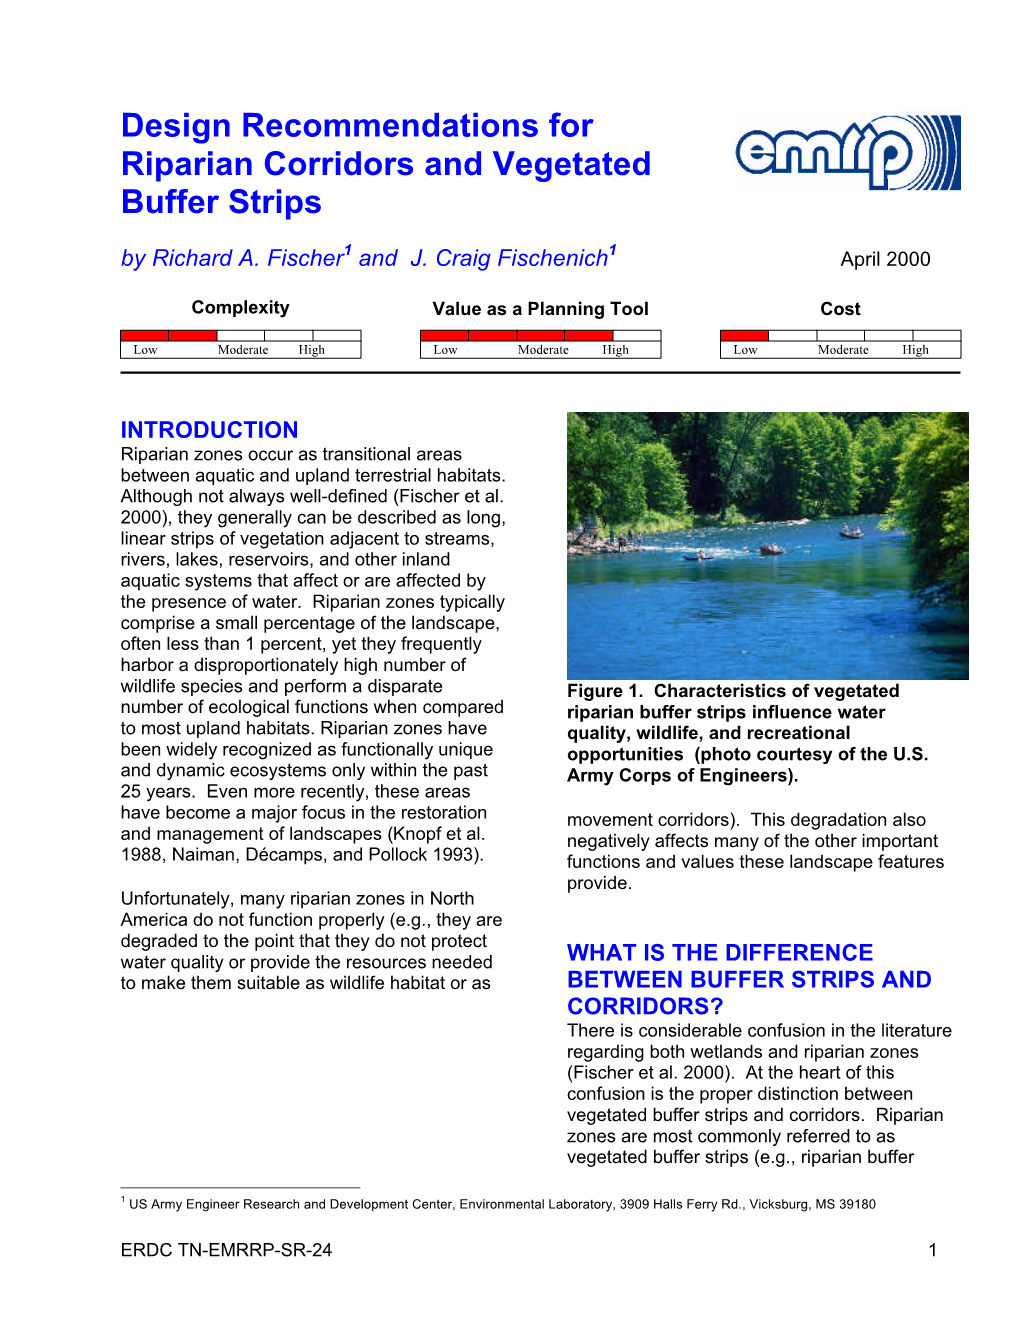 Design Recommendations for Riparian Corridors and Vegetated Buffer Strips by Richard A